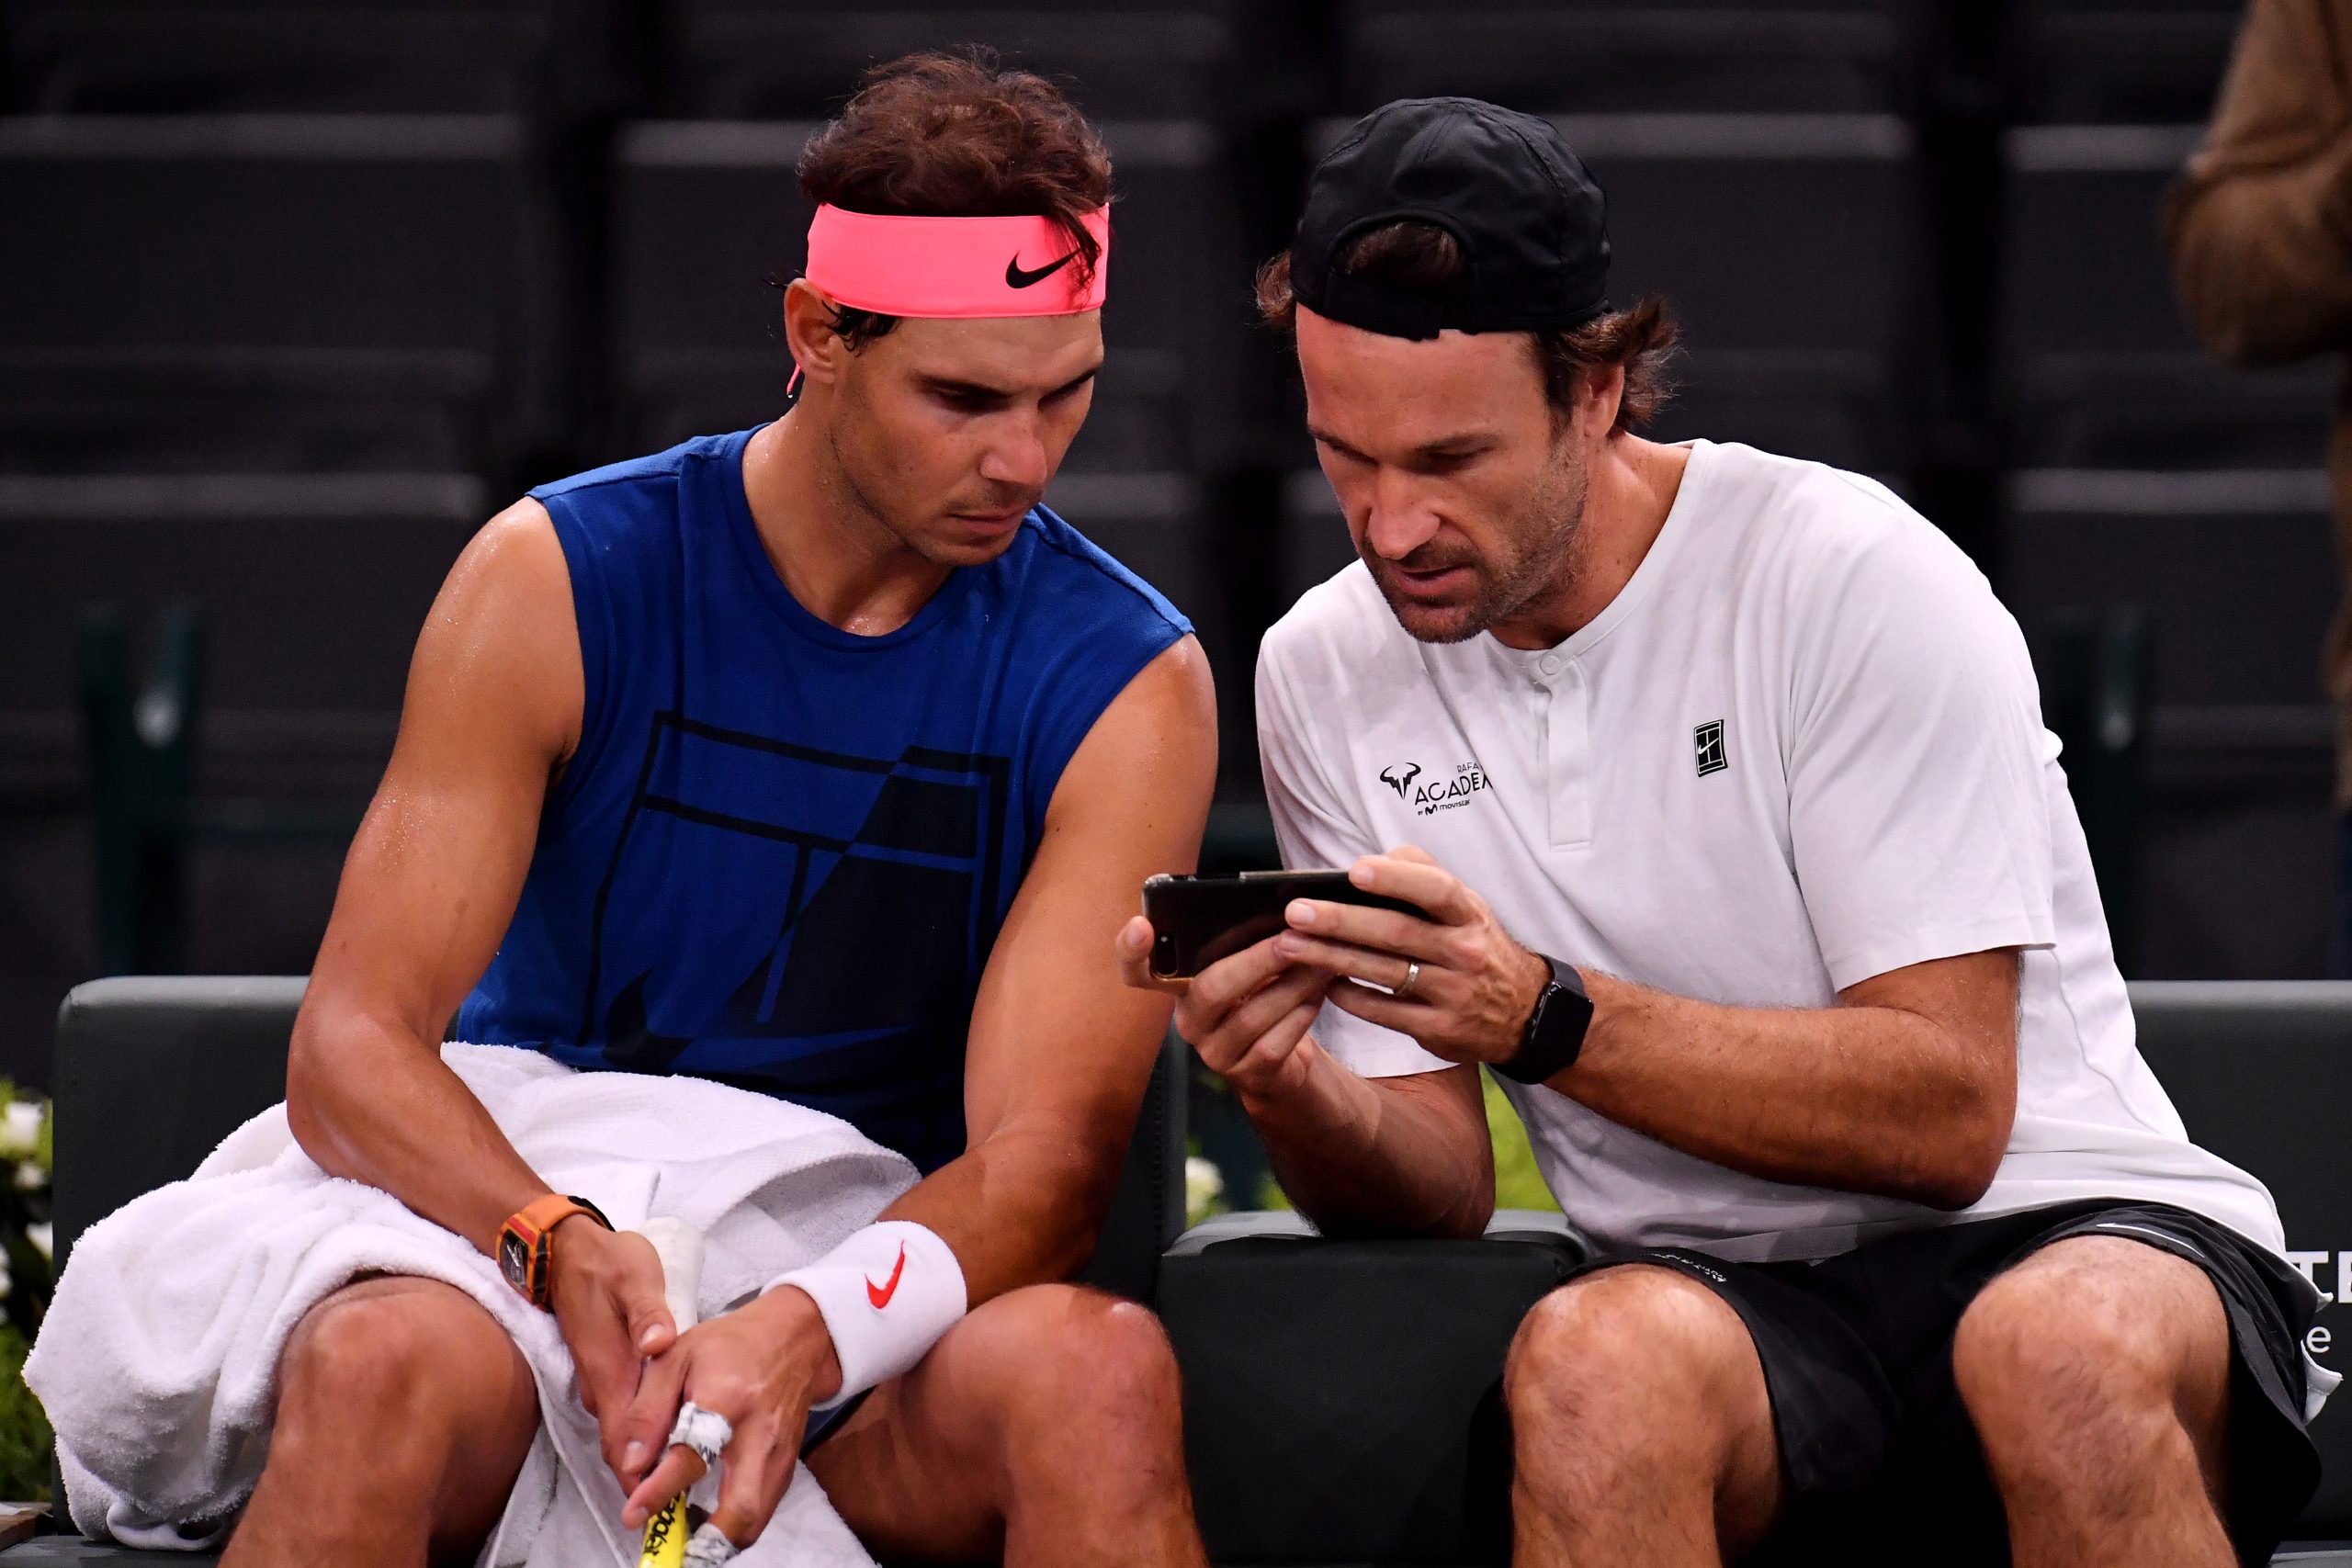 Who is the current coach of Spaniard Rafael Nadal?